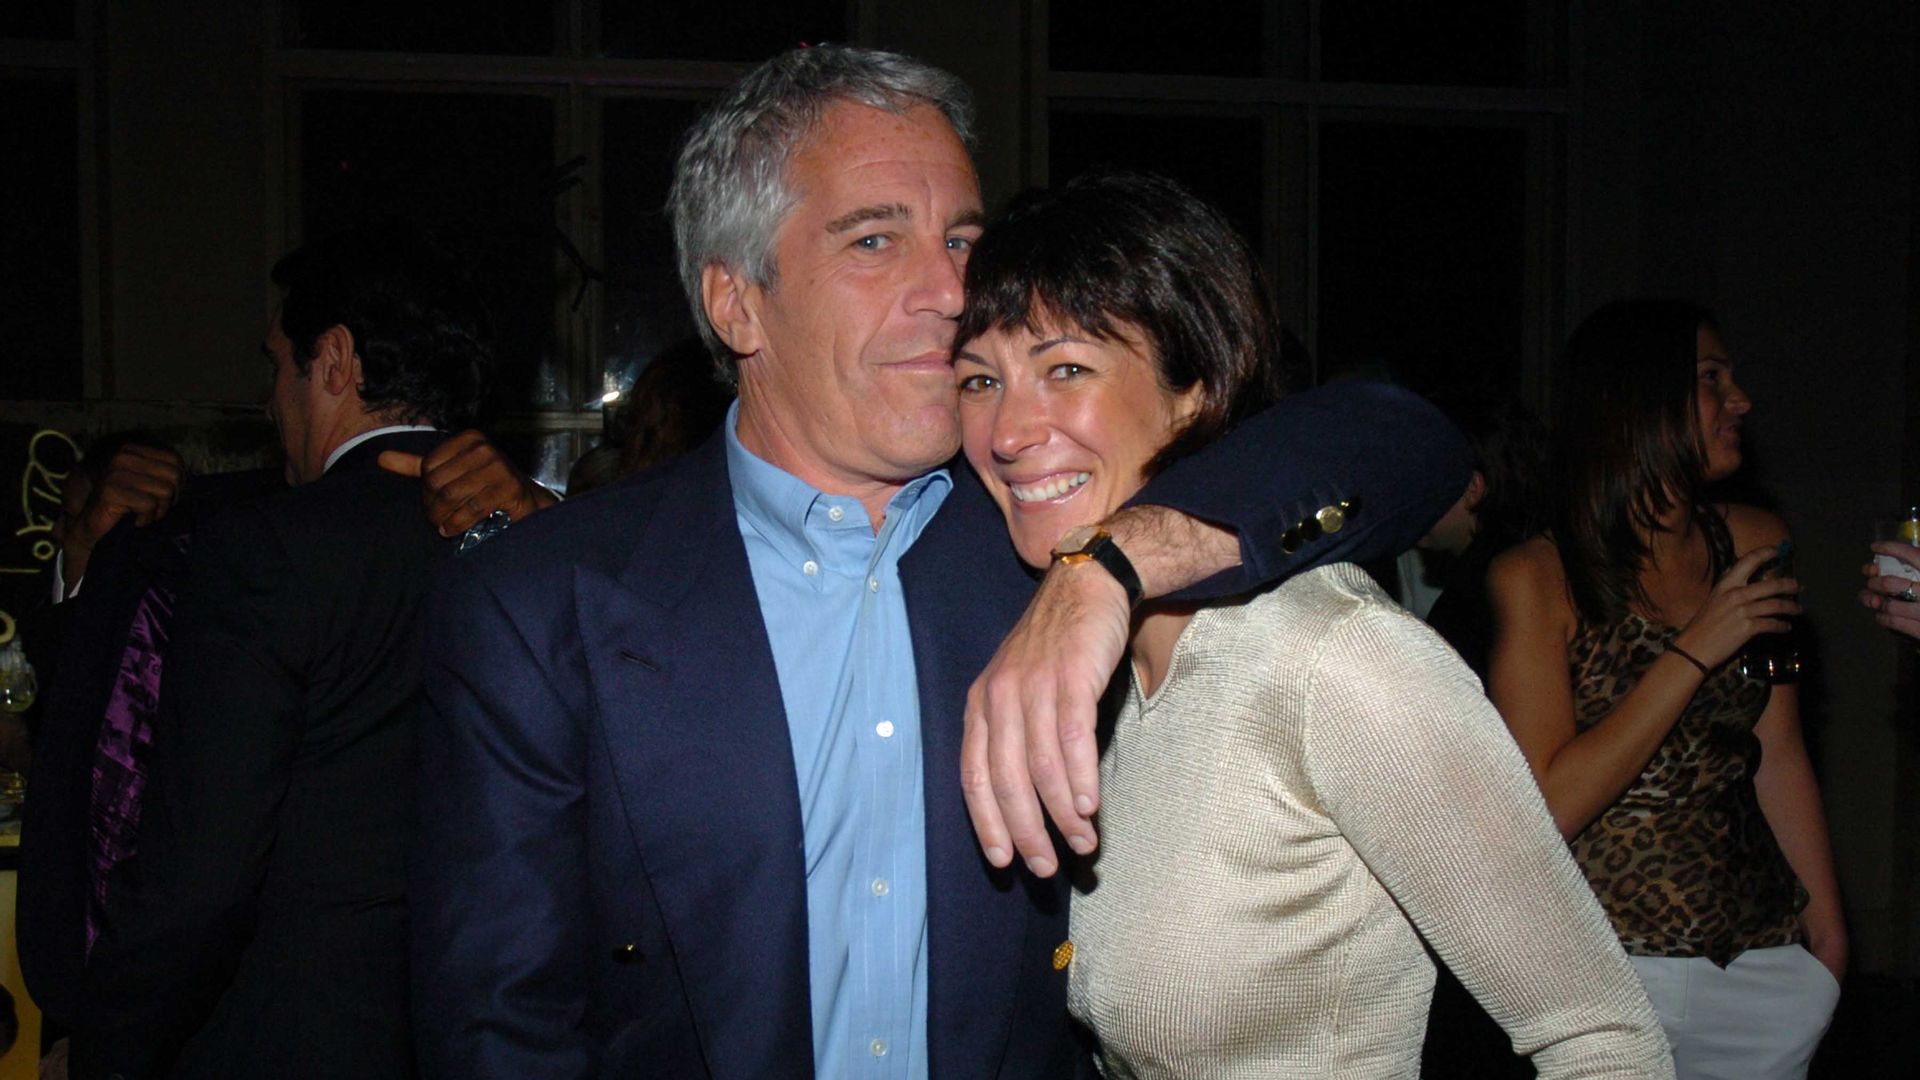 Jeffrey Epstein and Ghislaine Maxwell in New York City in 2005